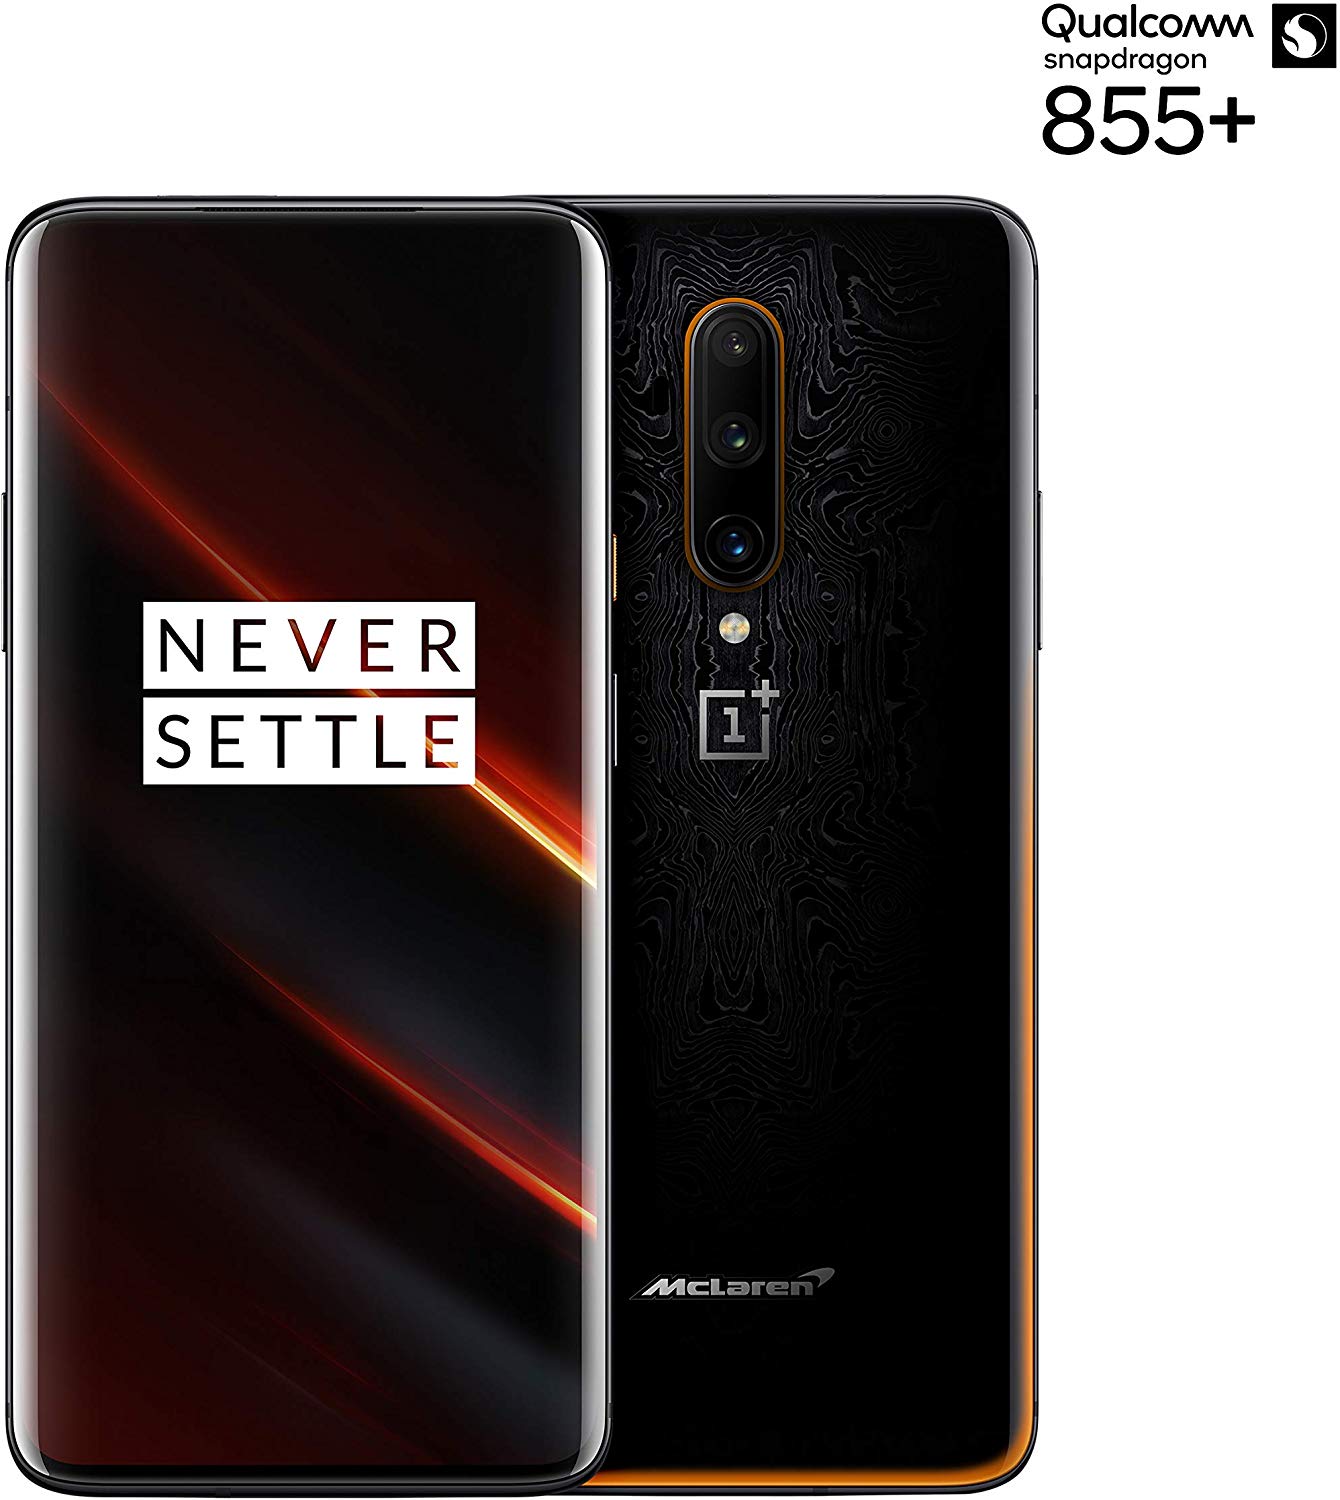 OxygenOS 11.0.2.1 for the OnePlus 7T Pro and OnePlus 7T